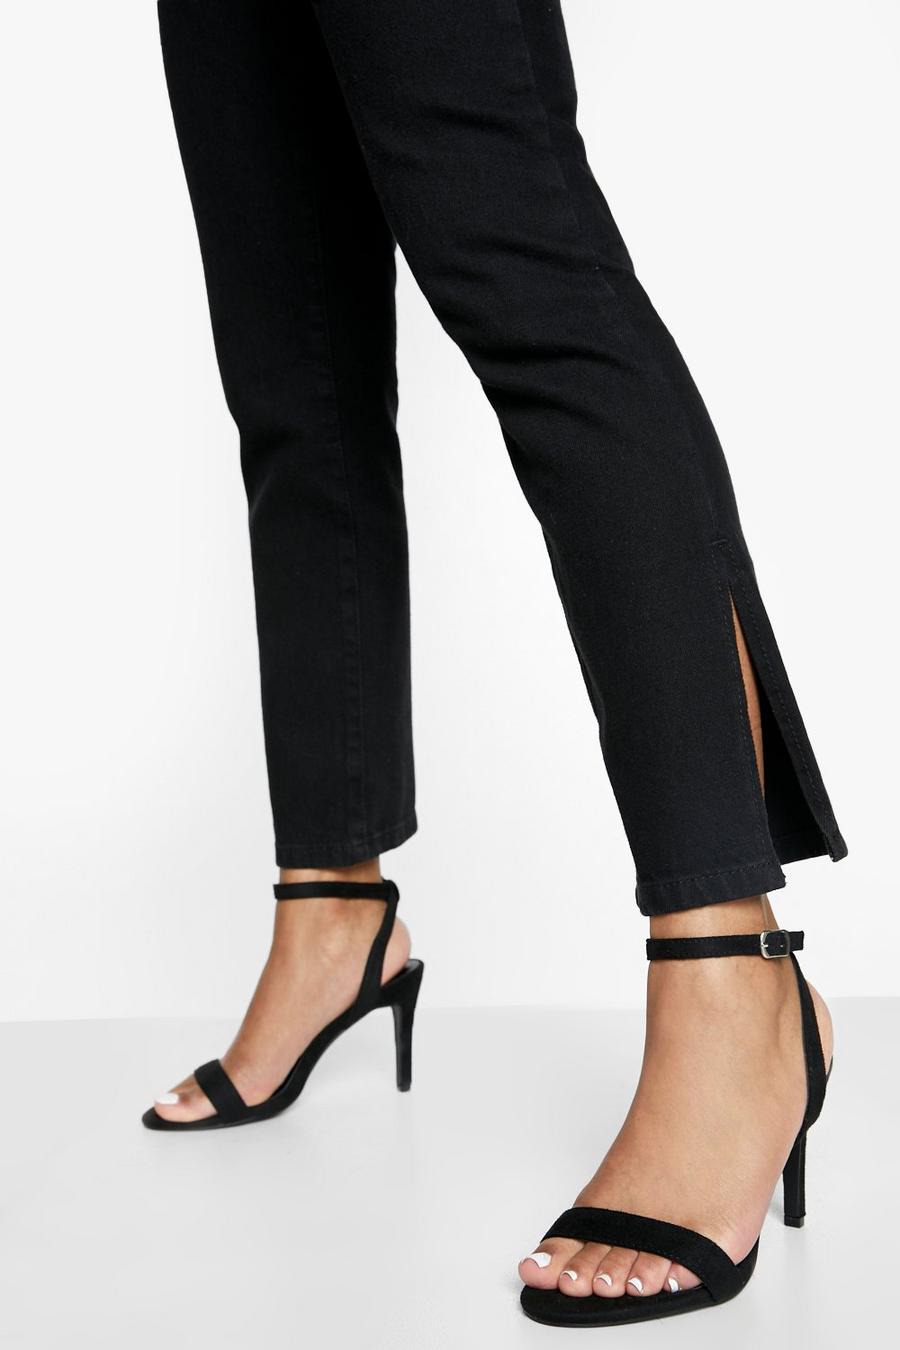 Black nero Low Barely There Heels